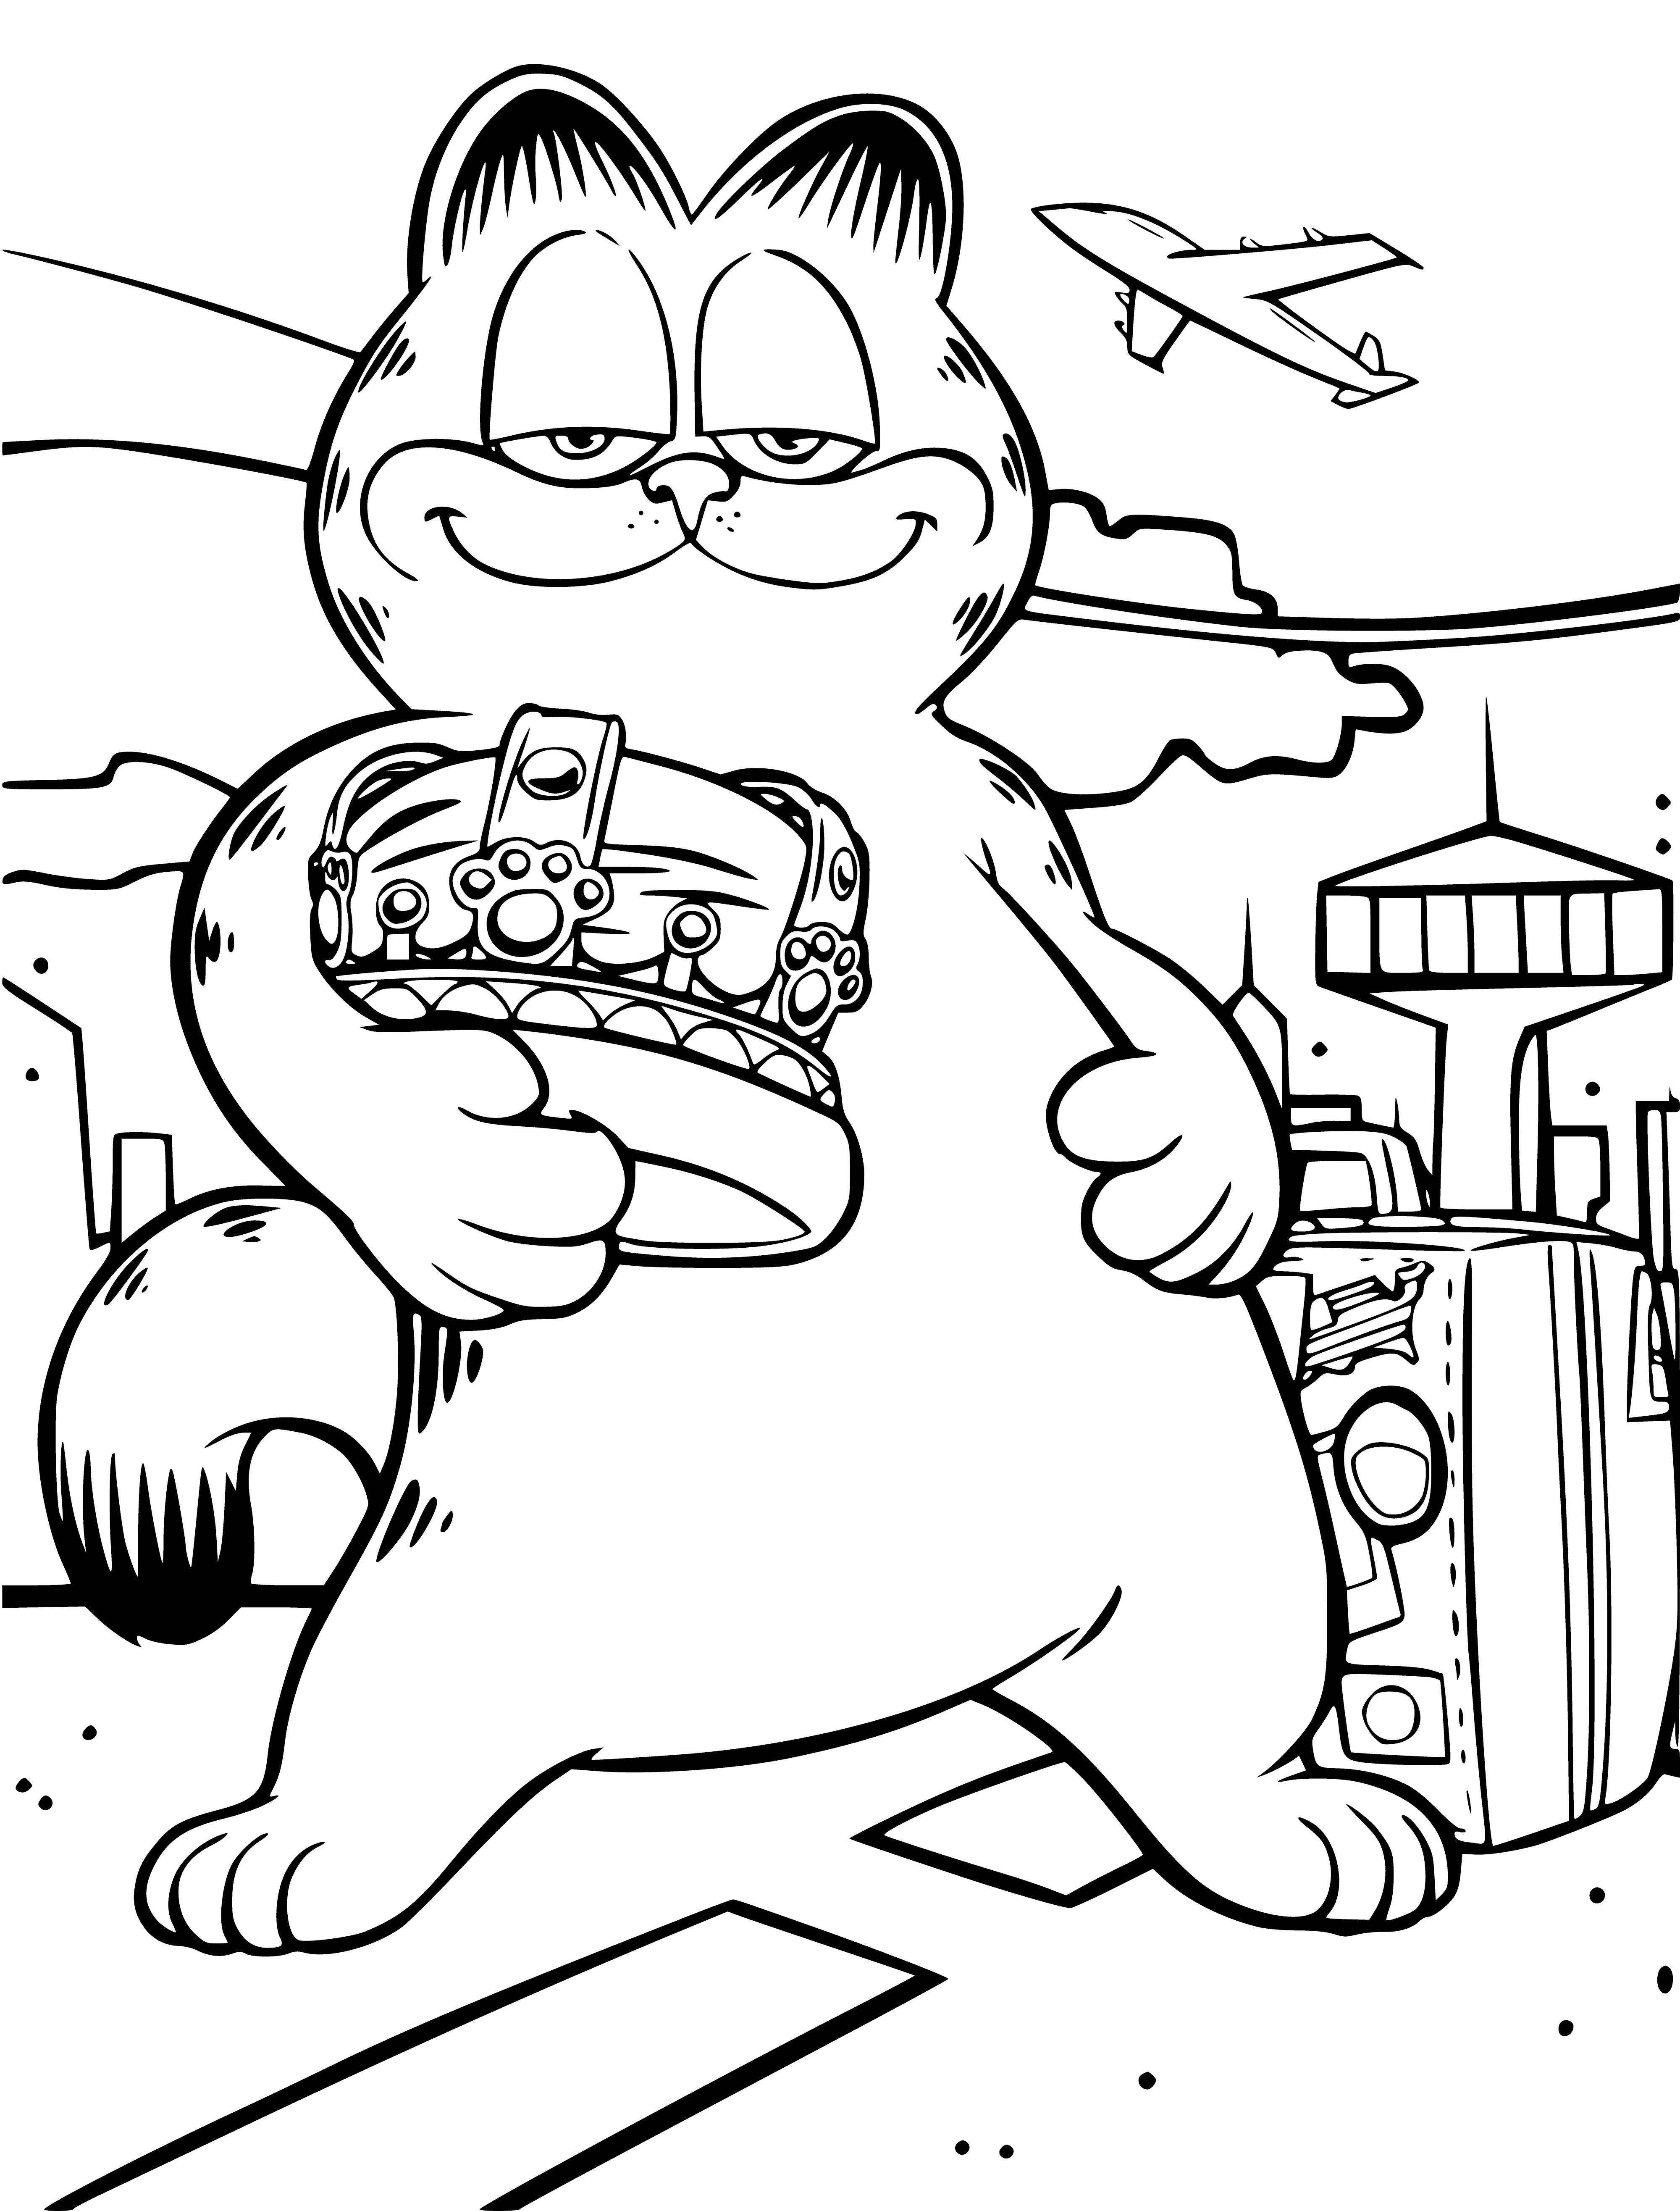 Super cat Garfield coloring page